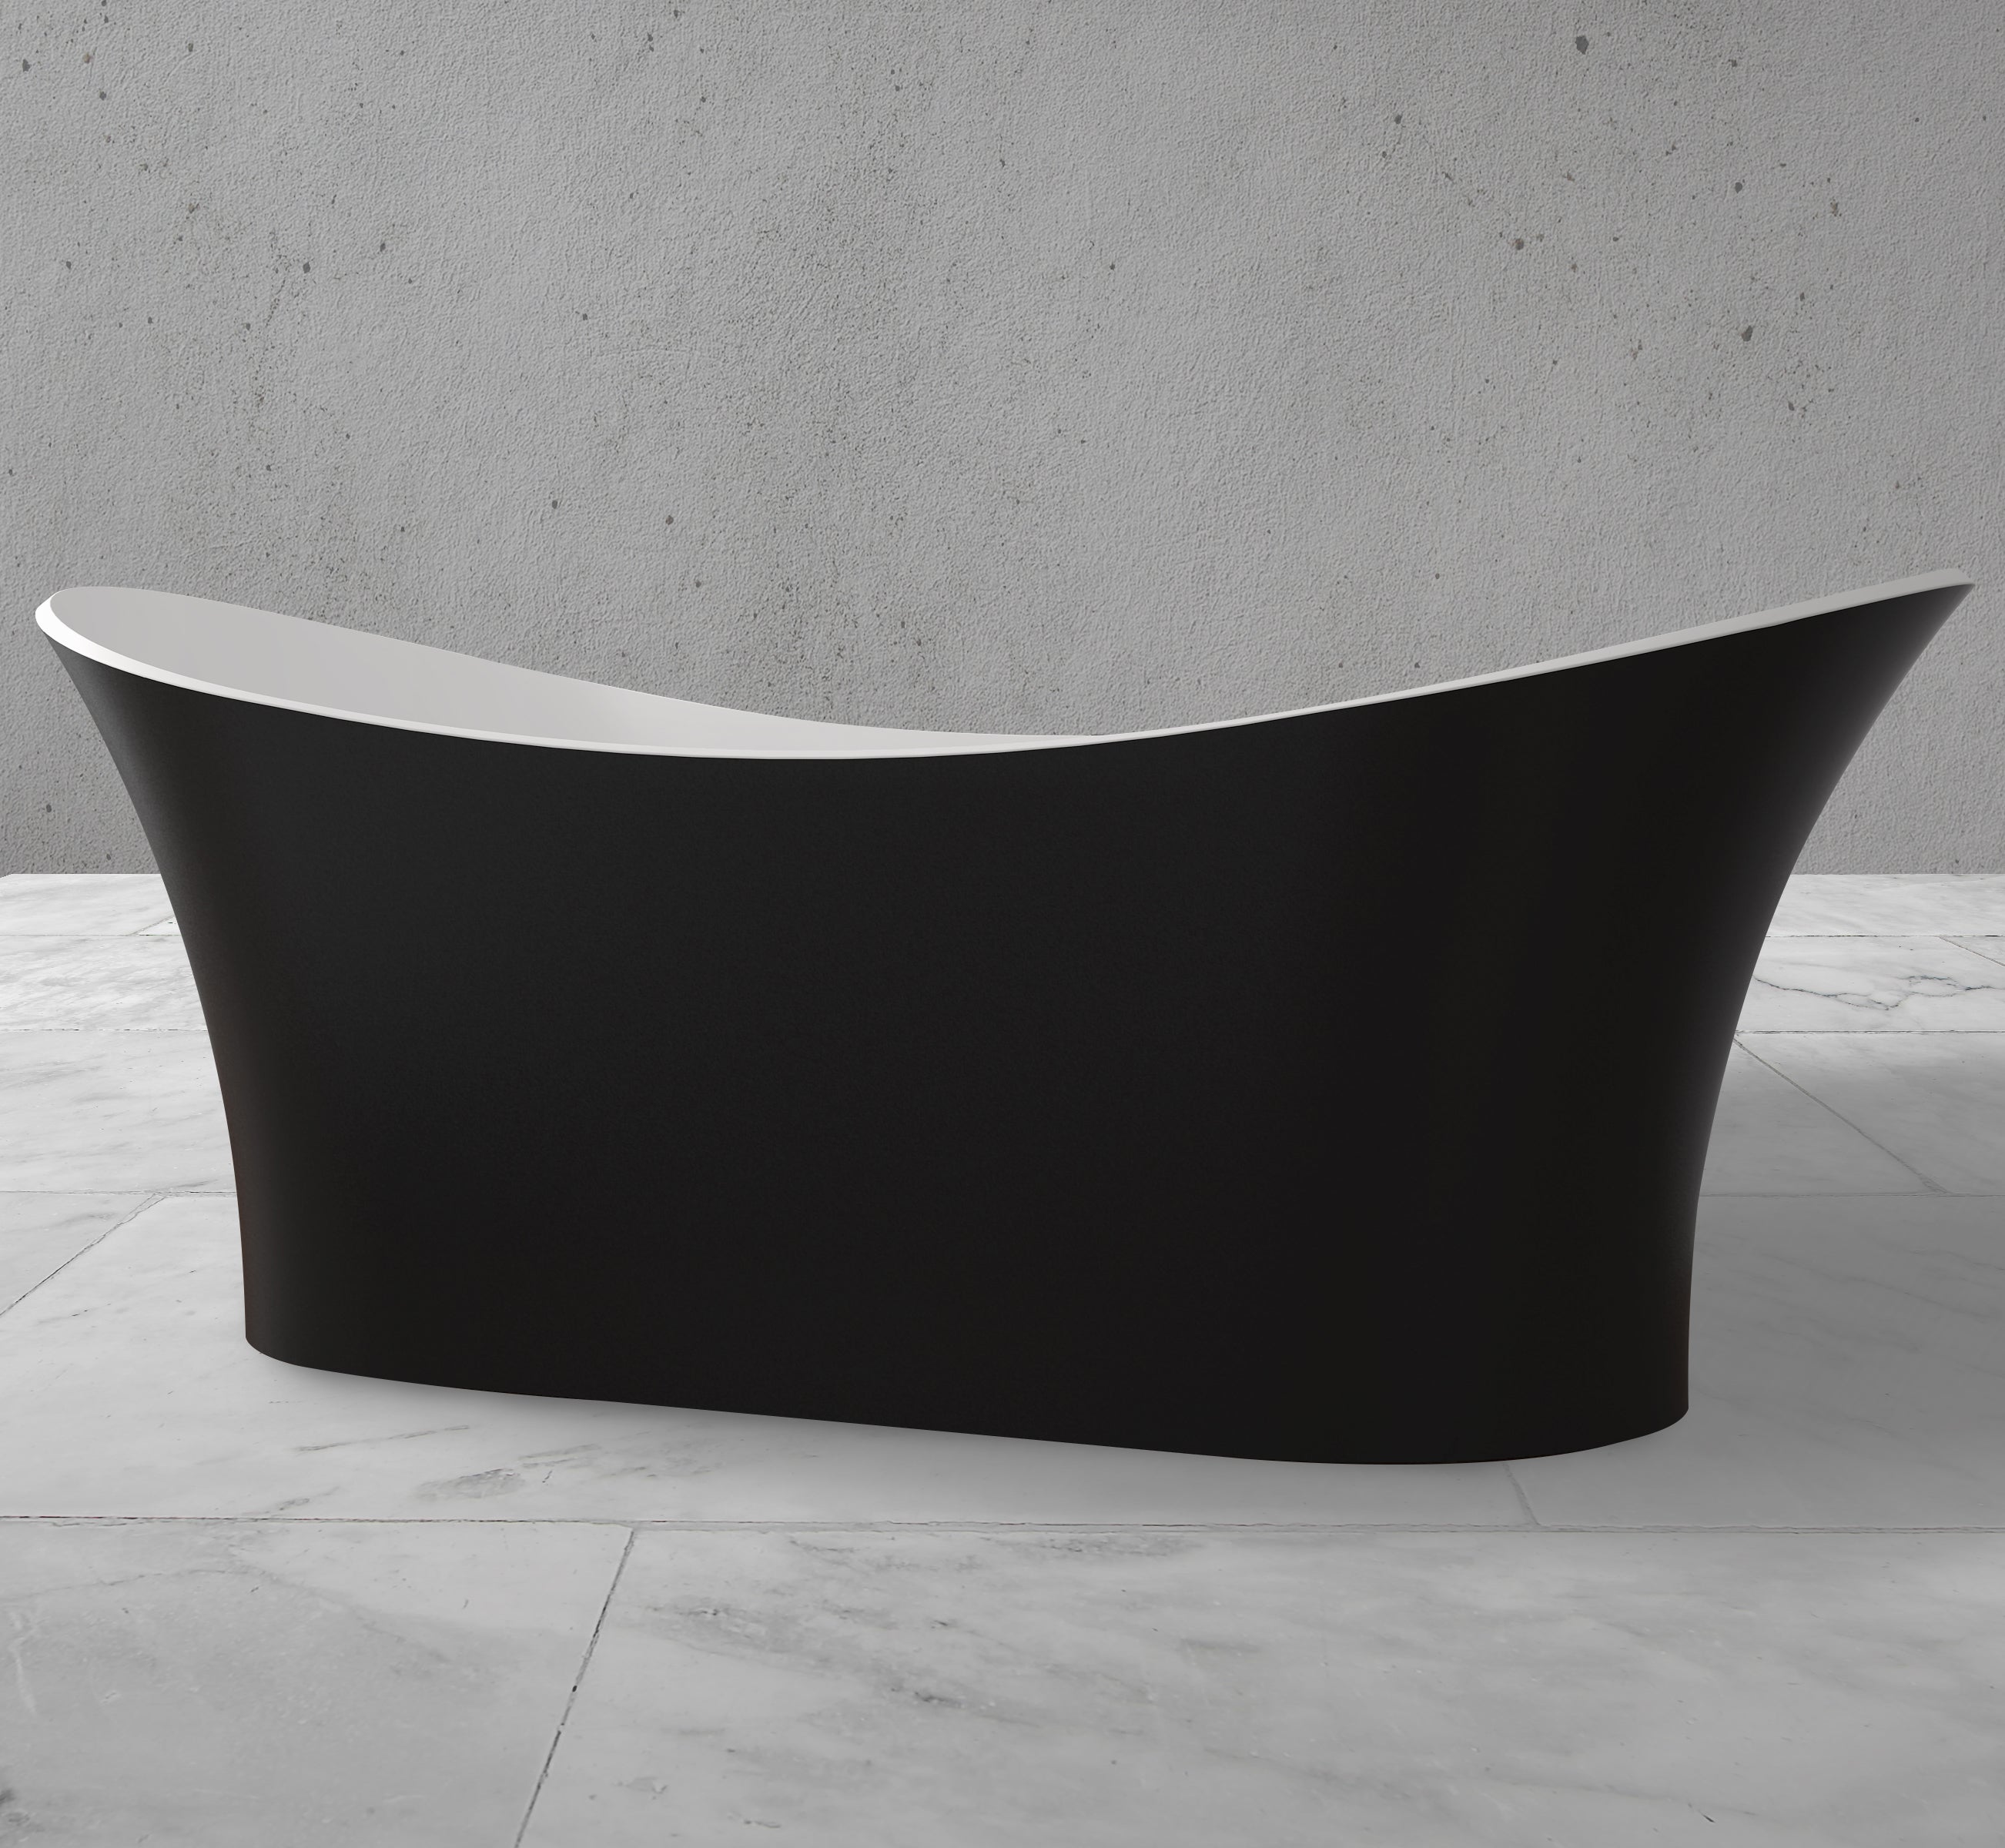 69" Rounded Solid Surface Freestanding Bathtub